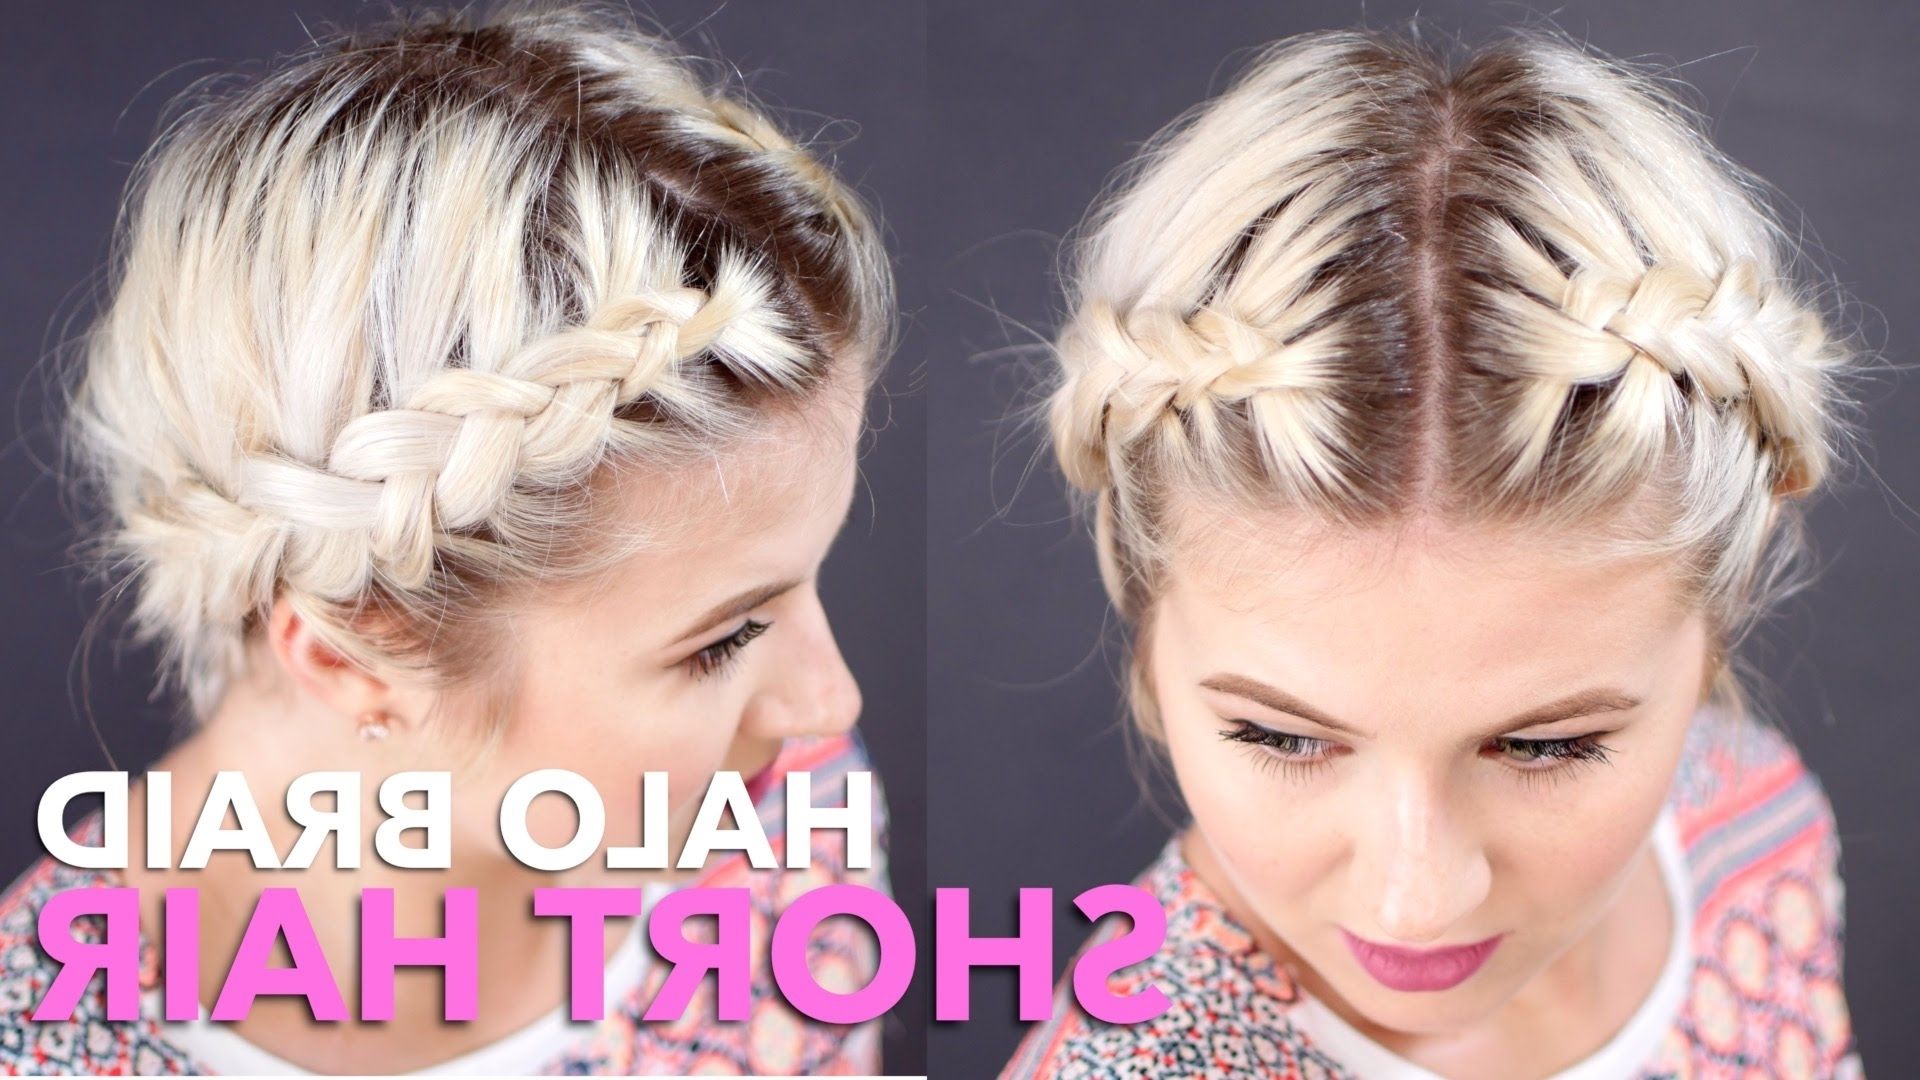 Well Known Thick Halo Braid Hairstyles Intended For How To Milkmaid Braid Short Hair (View 14 of 15)